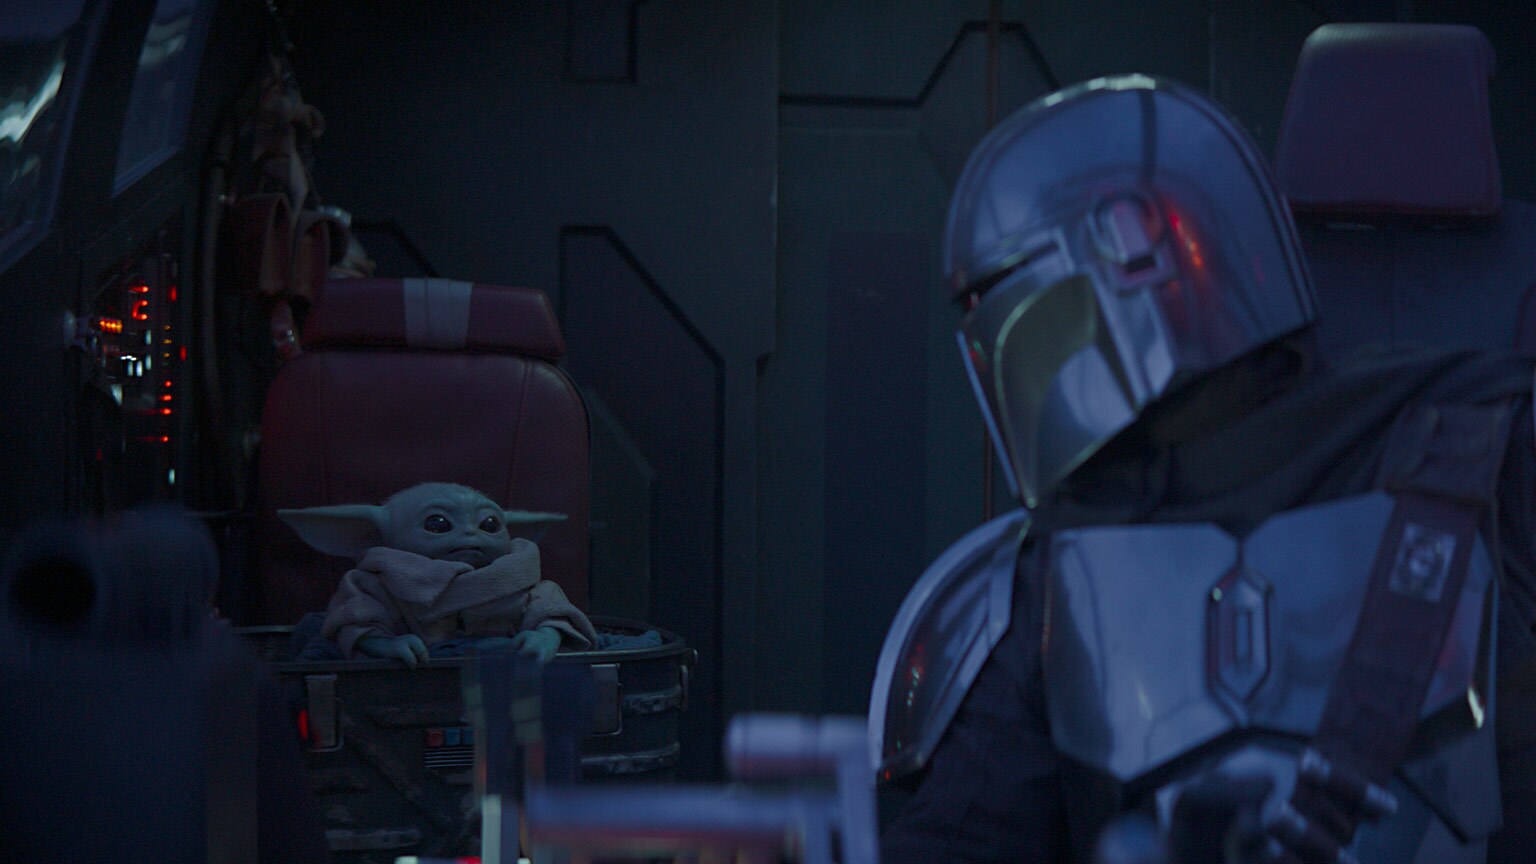 From a Certain Point of View: What’s Your Favorite Episode of The Mandalorian Season 1?